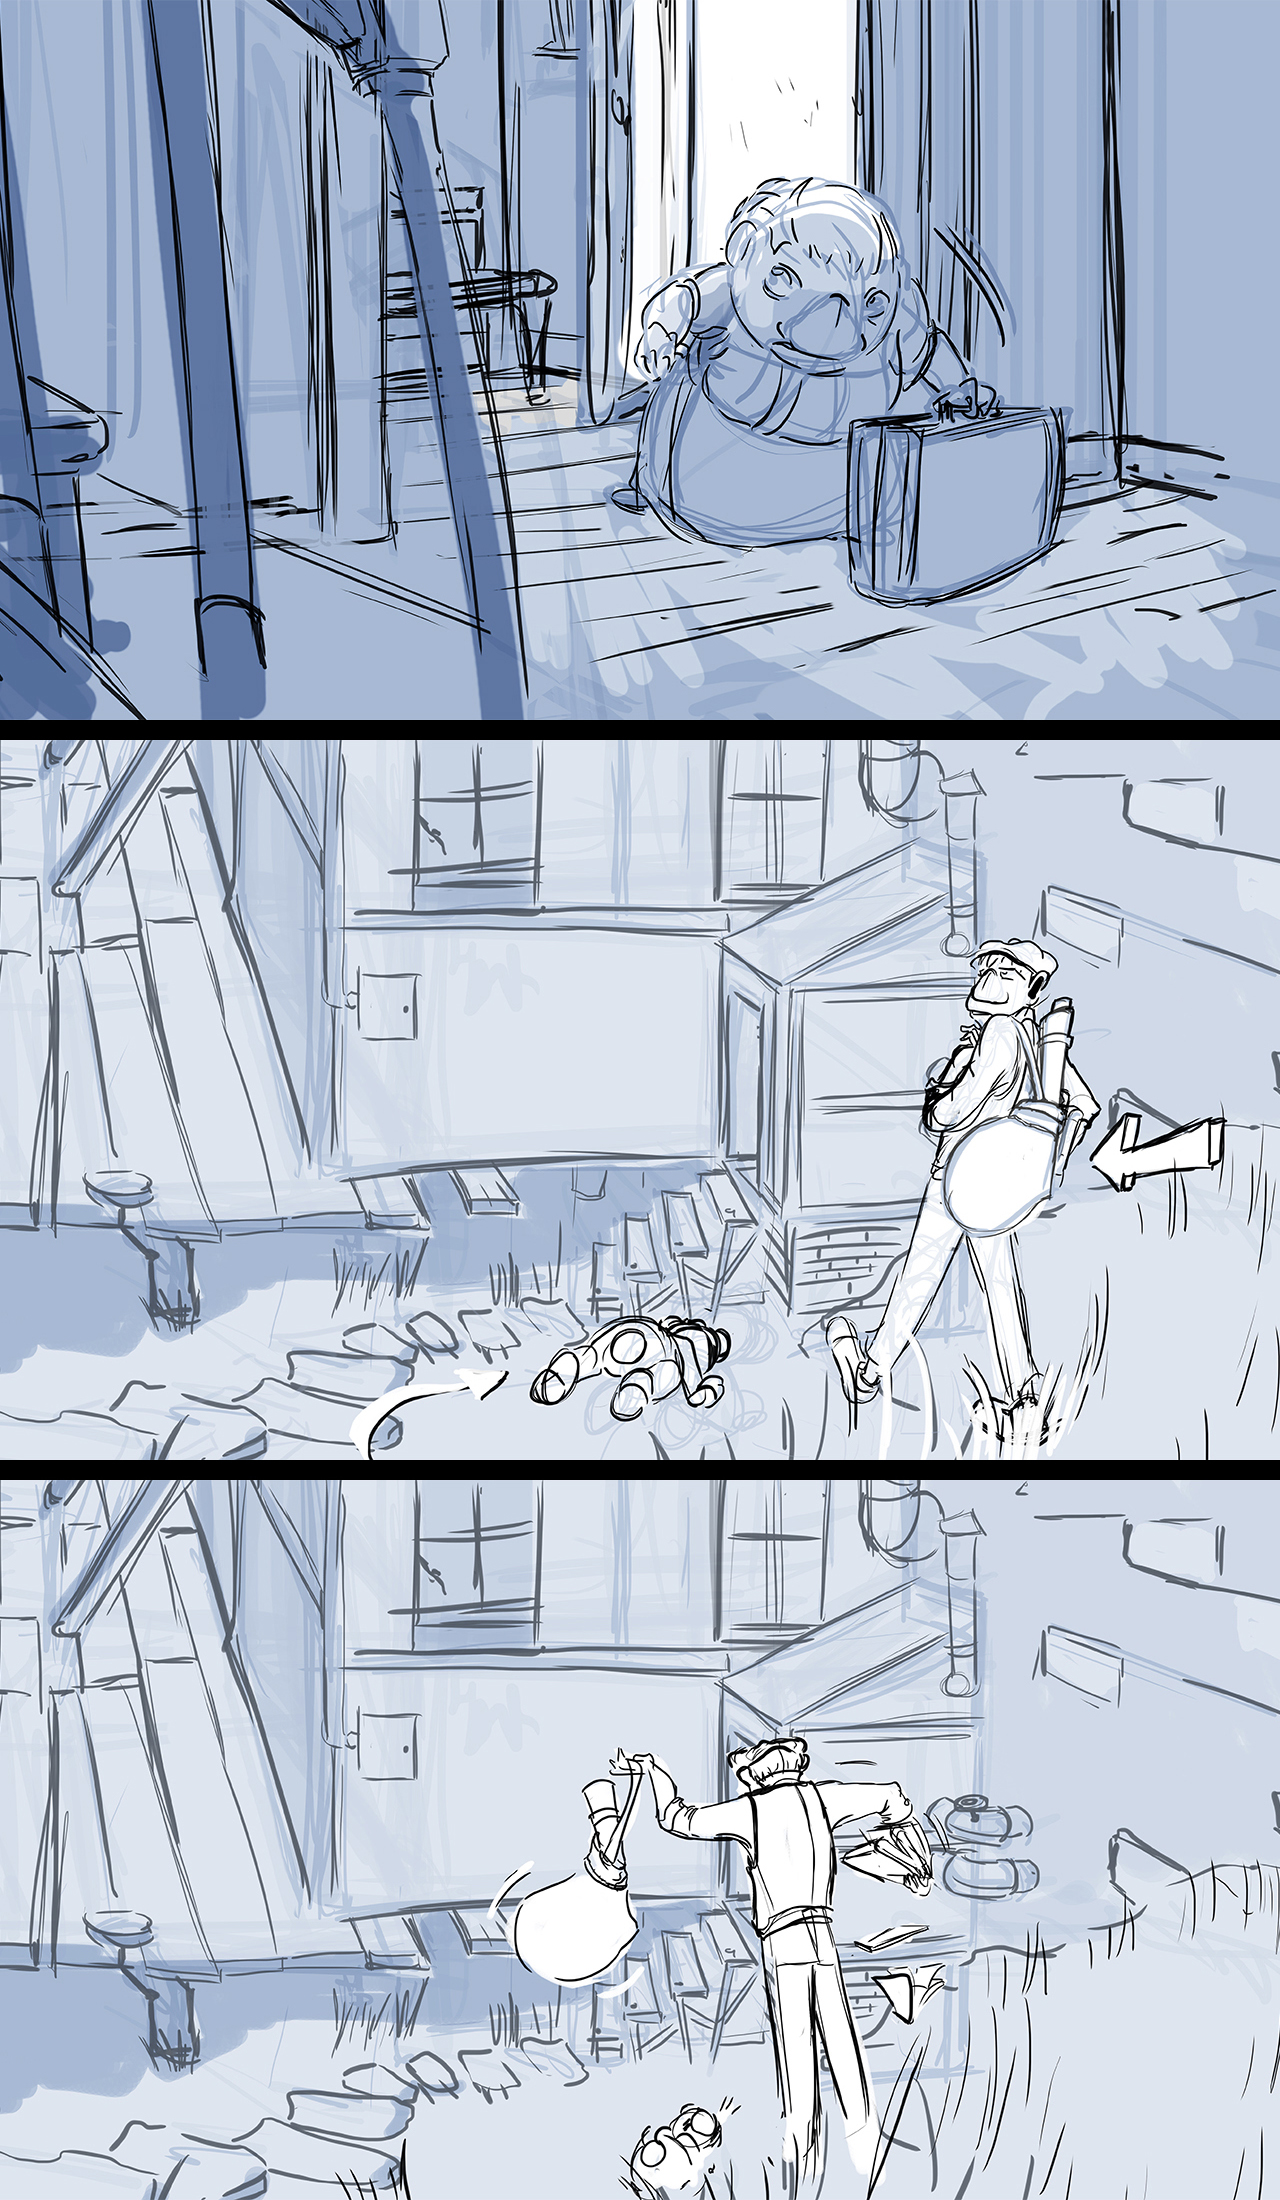 Storyboard sequence from an animated film. Sequence shows cross cut between interior shot of a woman yelling outside and an exterior shot of a man tripping over a dog.